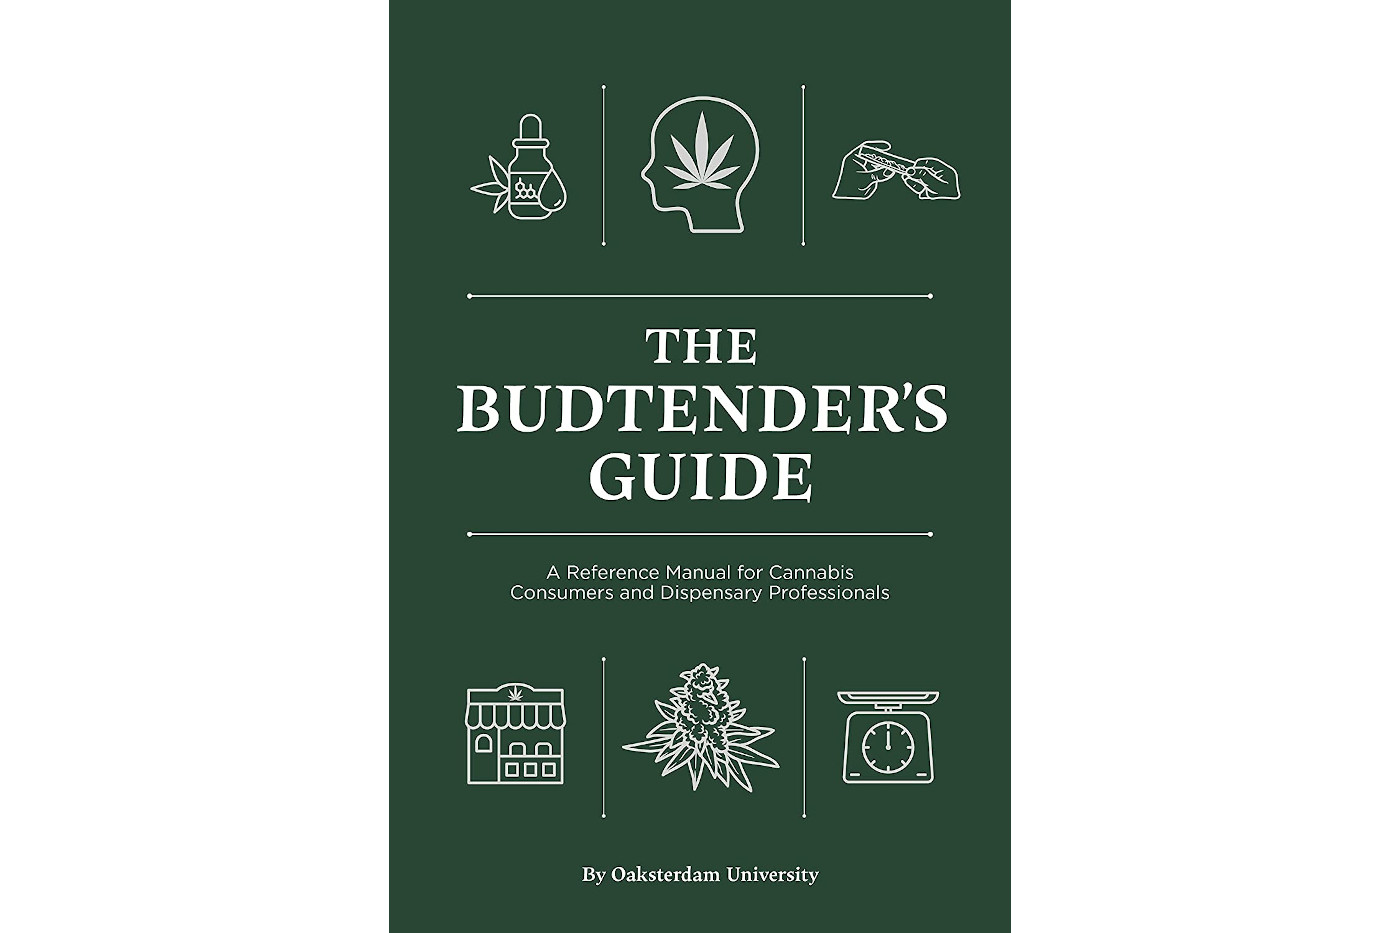 Oaksterdam University Offers New Budtender’s Guide Book Free on New Year’s Day Only